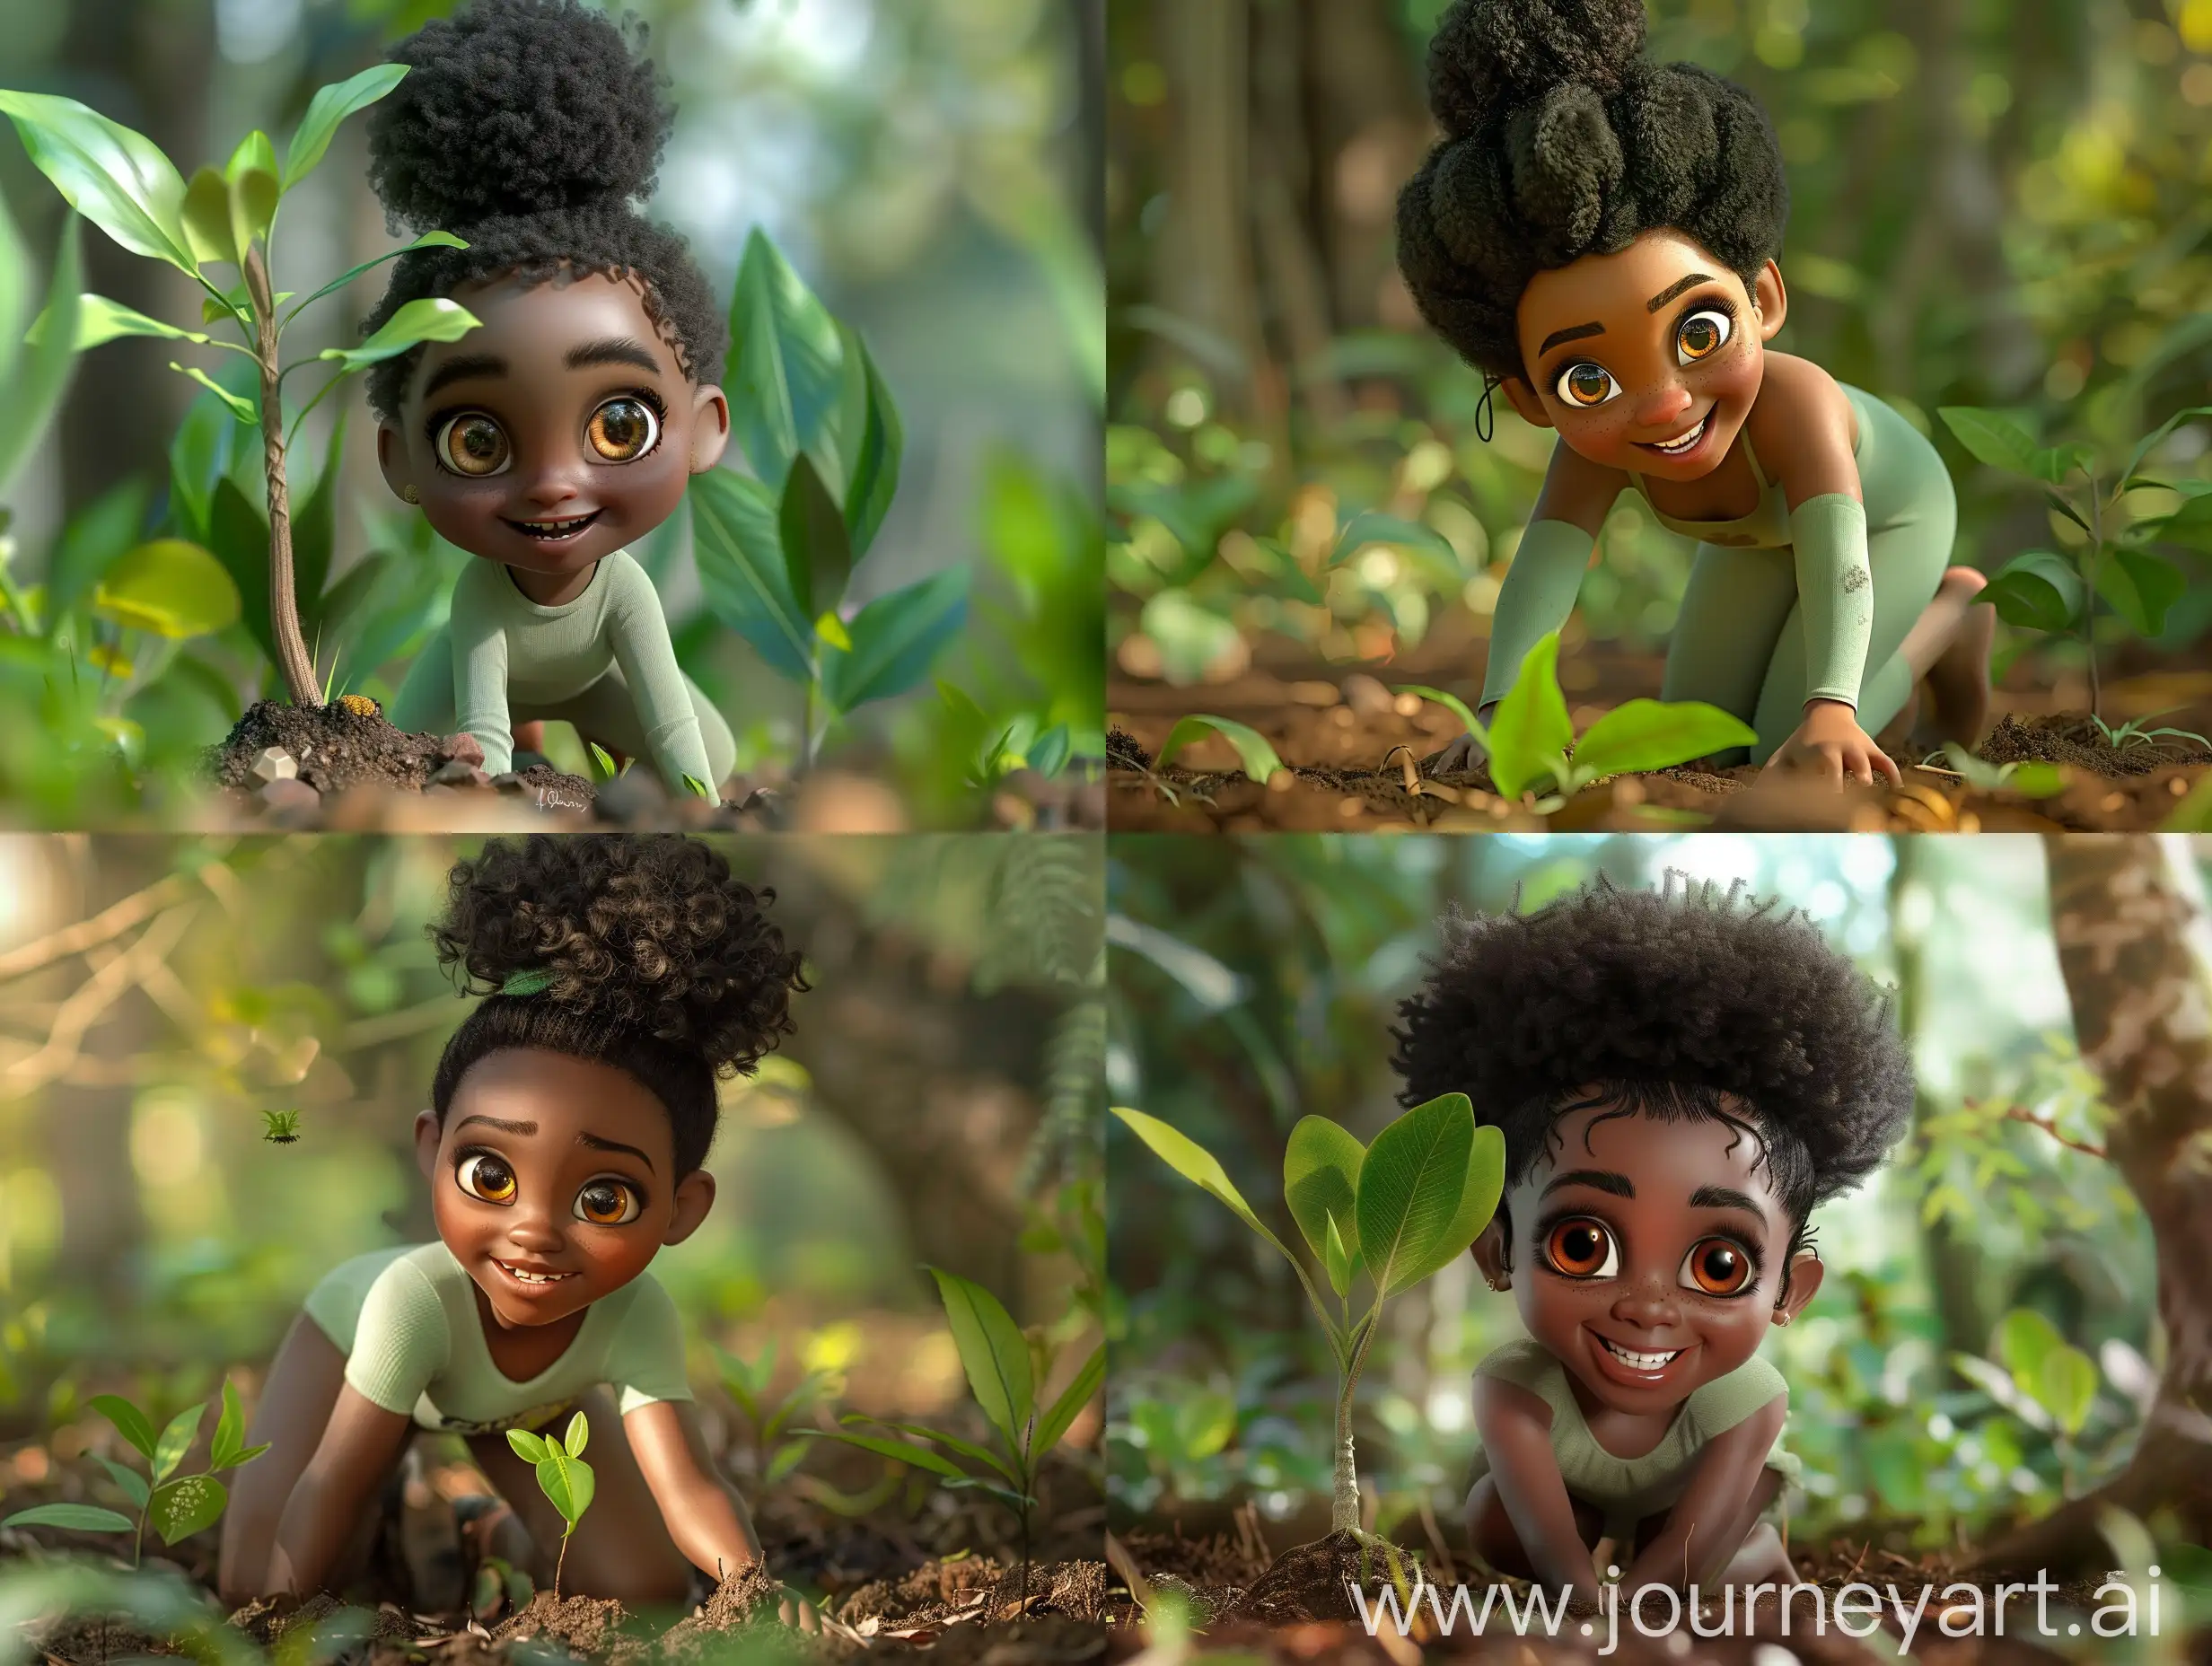 Full length zoomed out image of round faced smiling black African girl, l with large amber eyes, her natural 4c hair is in a poofy bun, she is wearing a light green tight fitting top and she is kneeling on the ground planting trees 